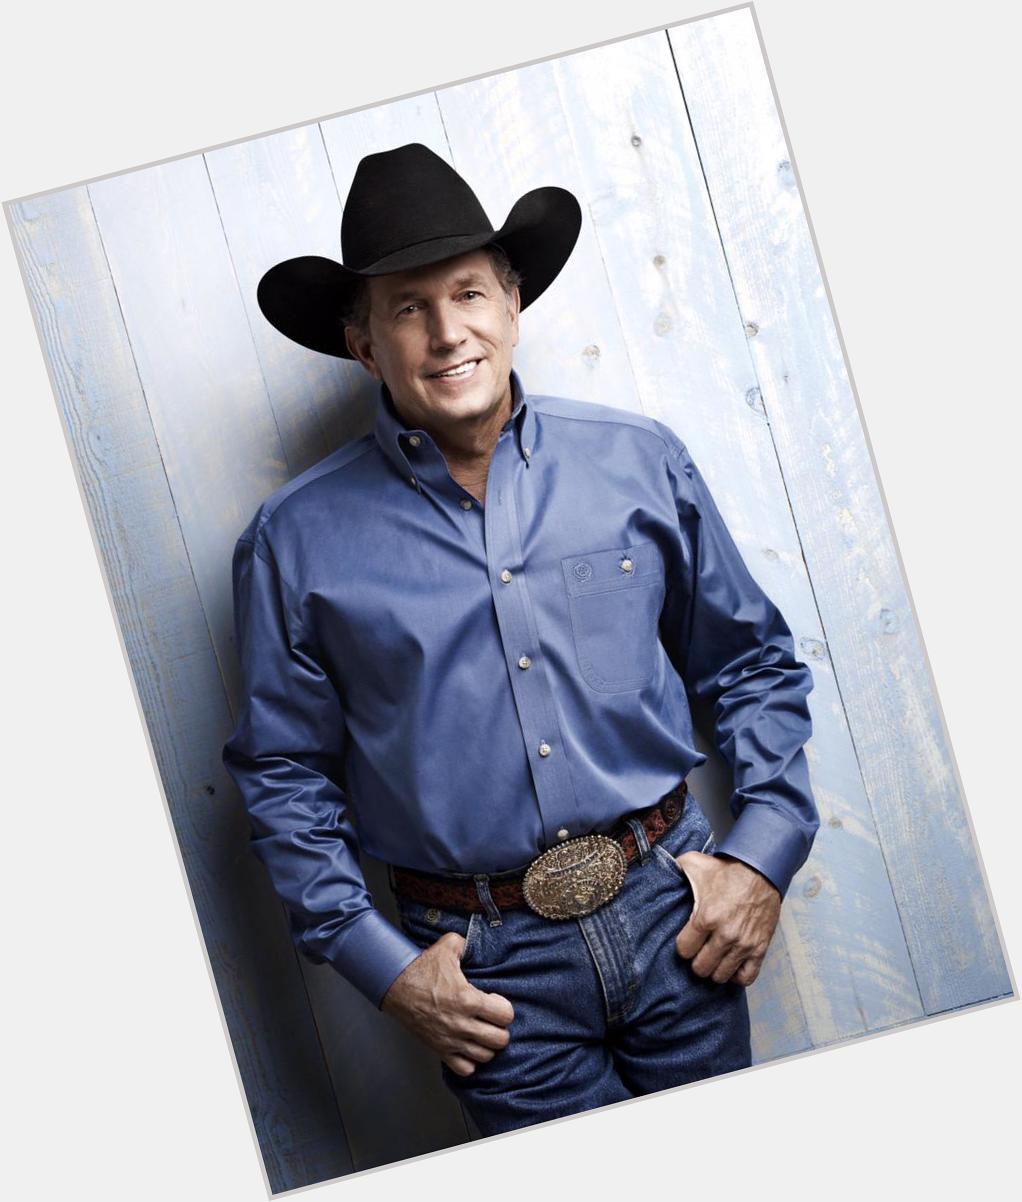 Happy birthday to the King of Country himself, Mr. George Strait! 